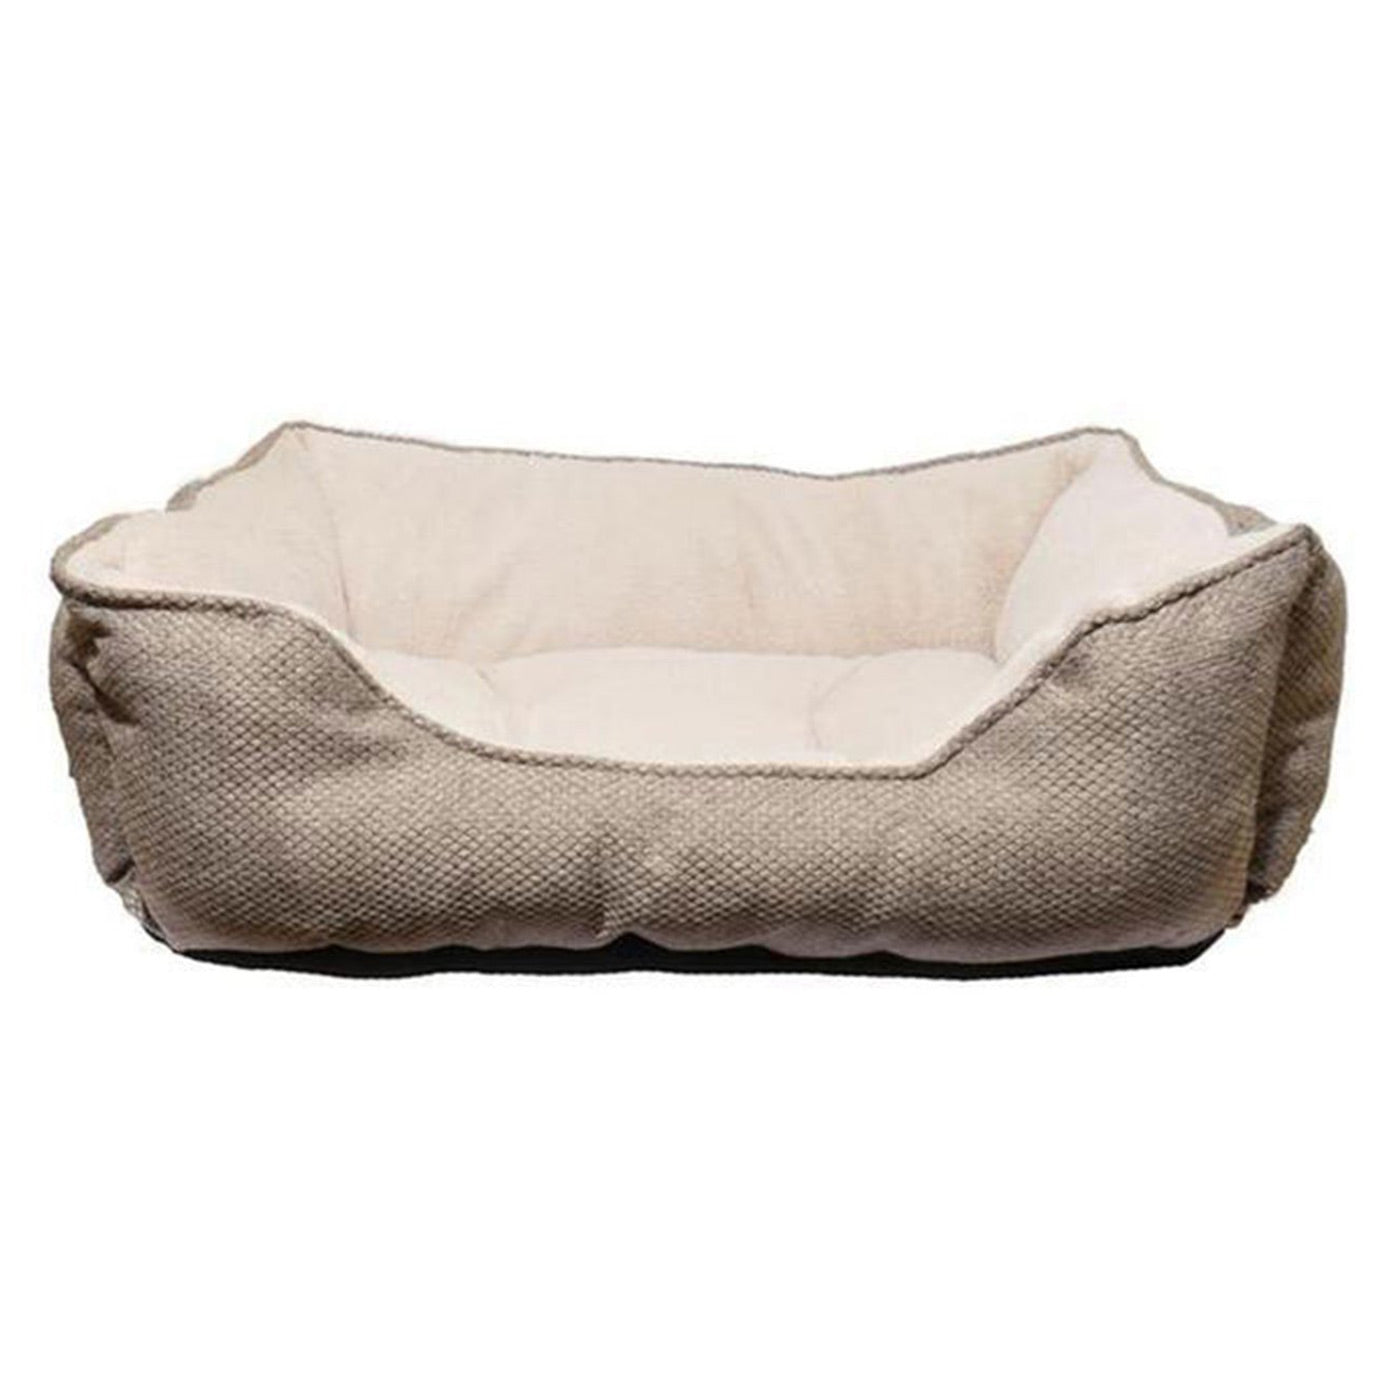 Truffle Luxury Square Bed - Size S-L